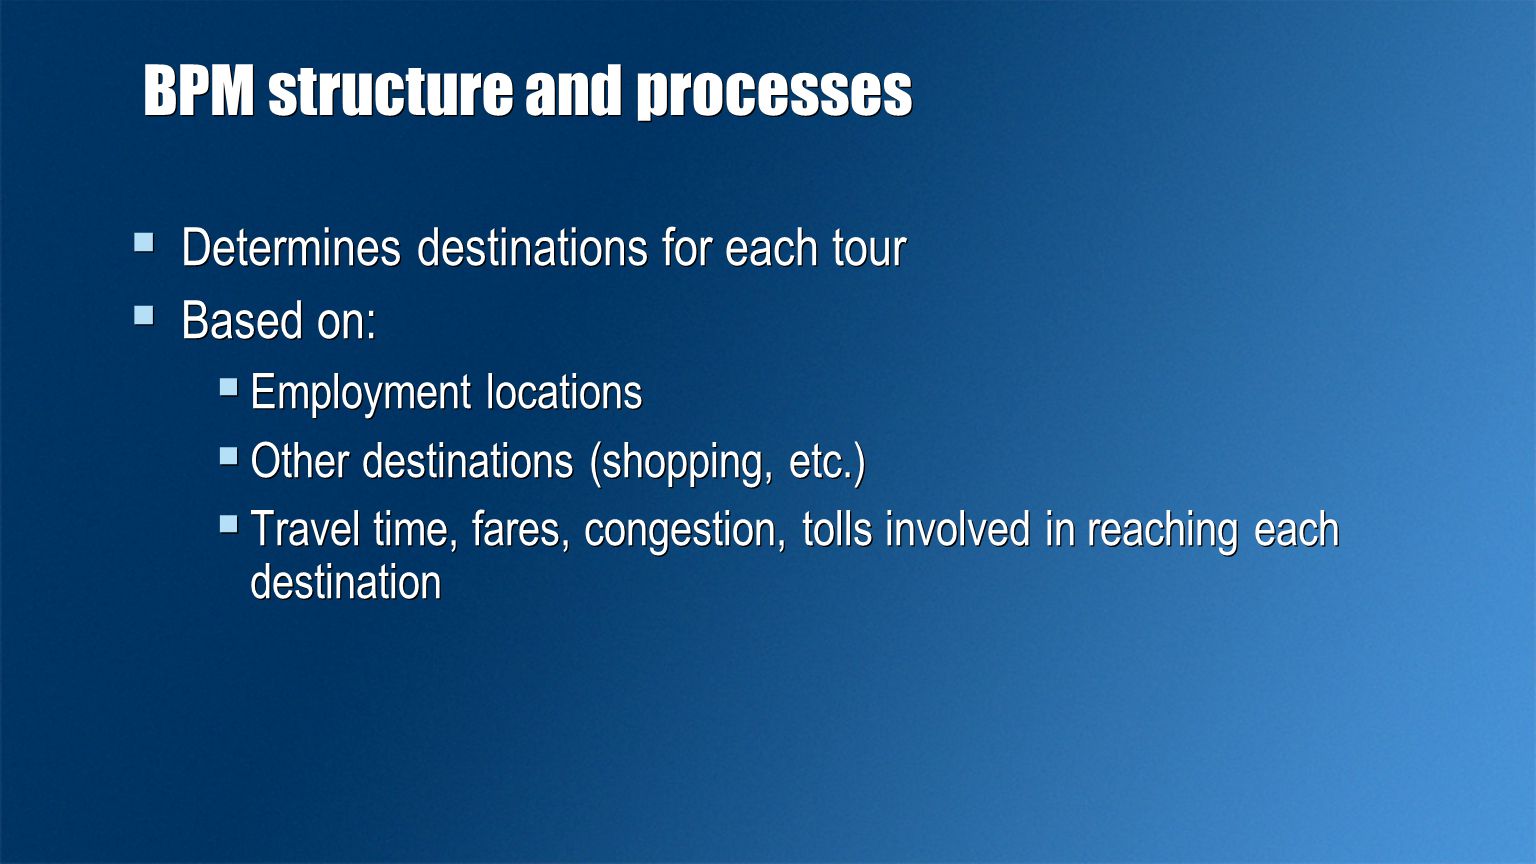 BPM structure and processes  Determines destinations for each tour  Based on:  Employment locations  Other destinations (shopping, etc.)  Travel time, fares, congestion, tolls involved in reaching each destination  Determines destinations for each tour  Based on:  Employment locations  Other destinations (shopping, etc.)  Travel time, fares, congestion, tolls involved in reaching each destination